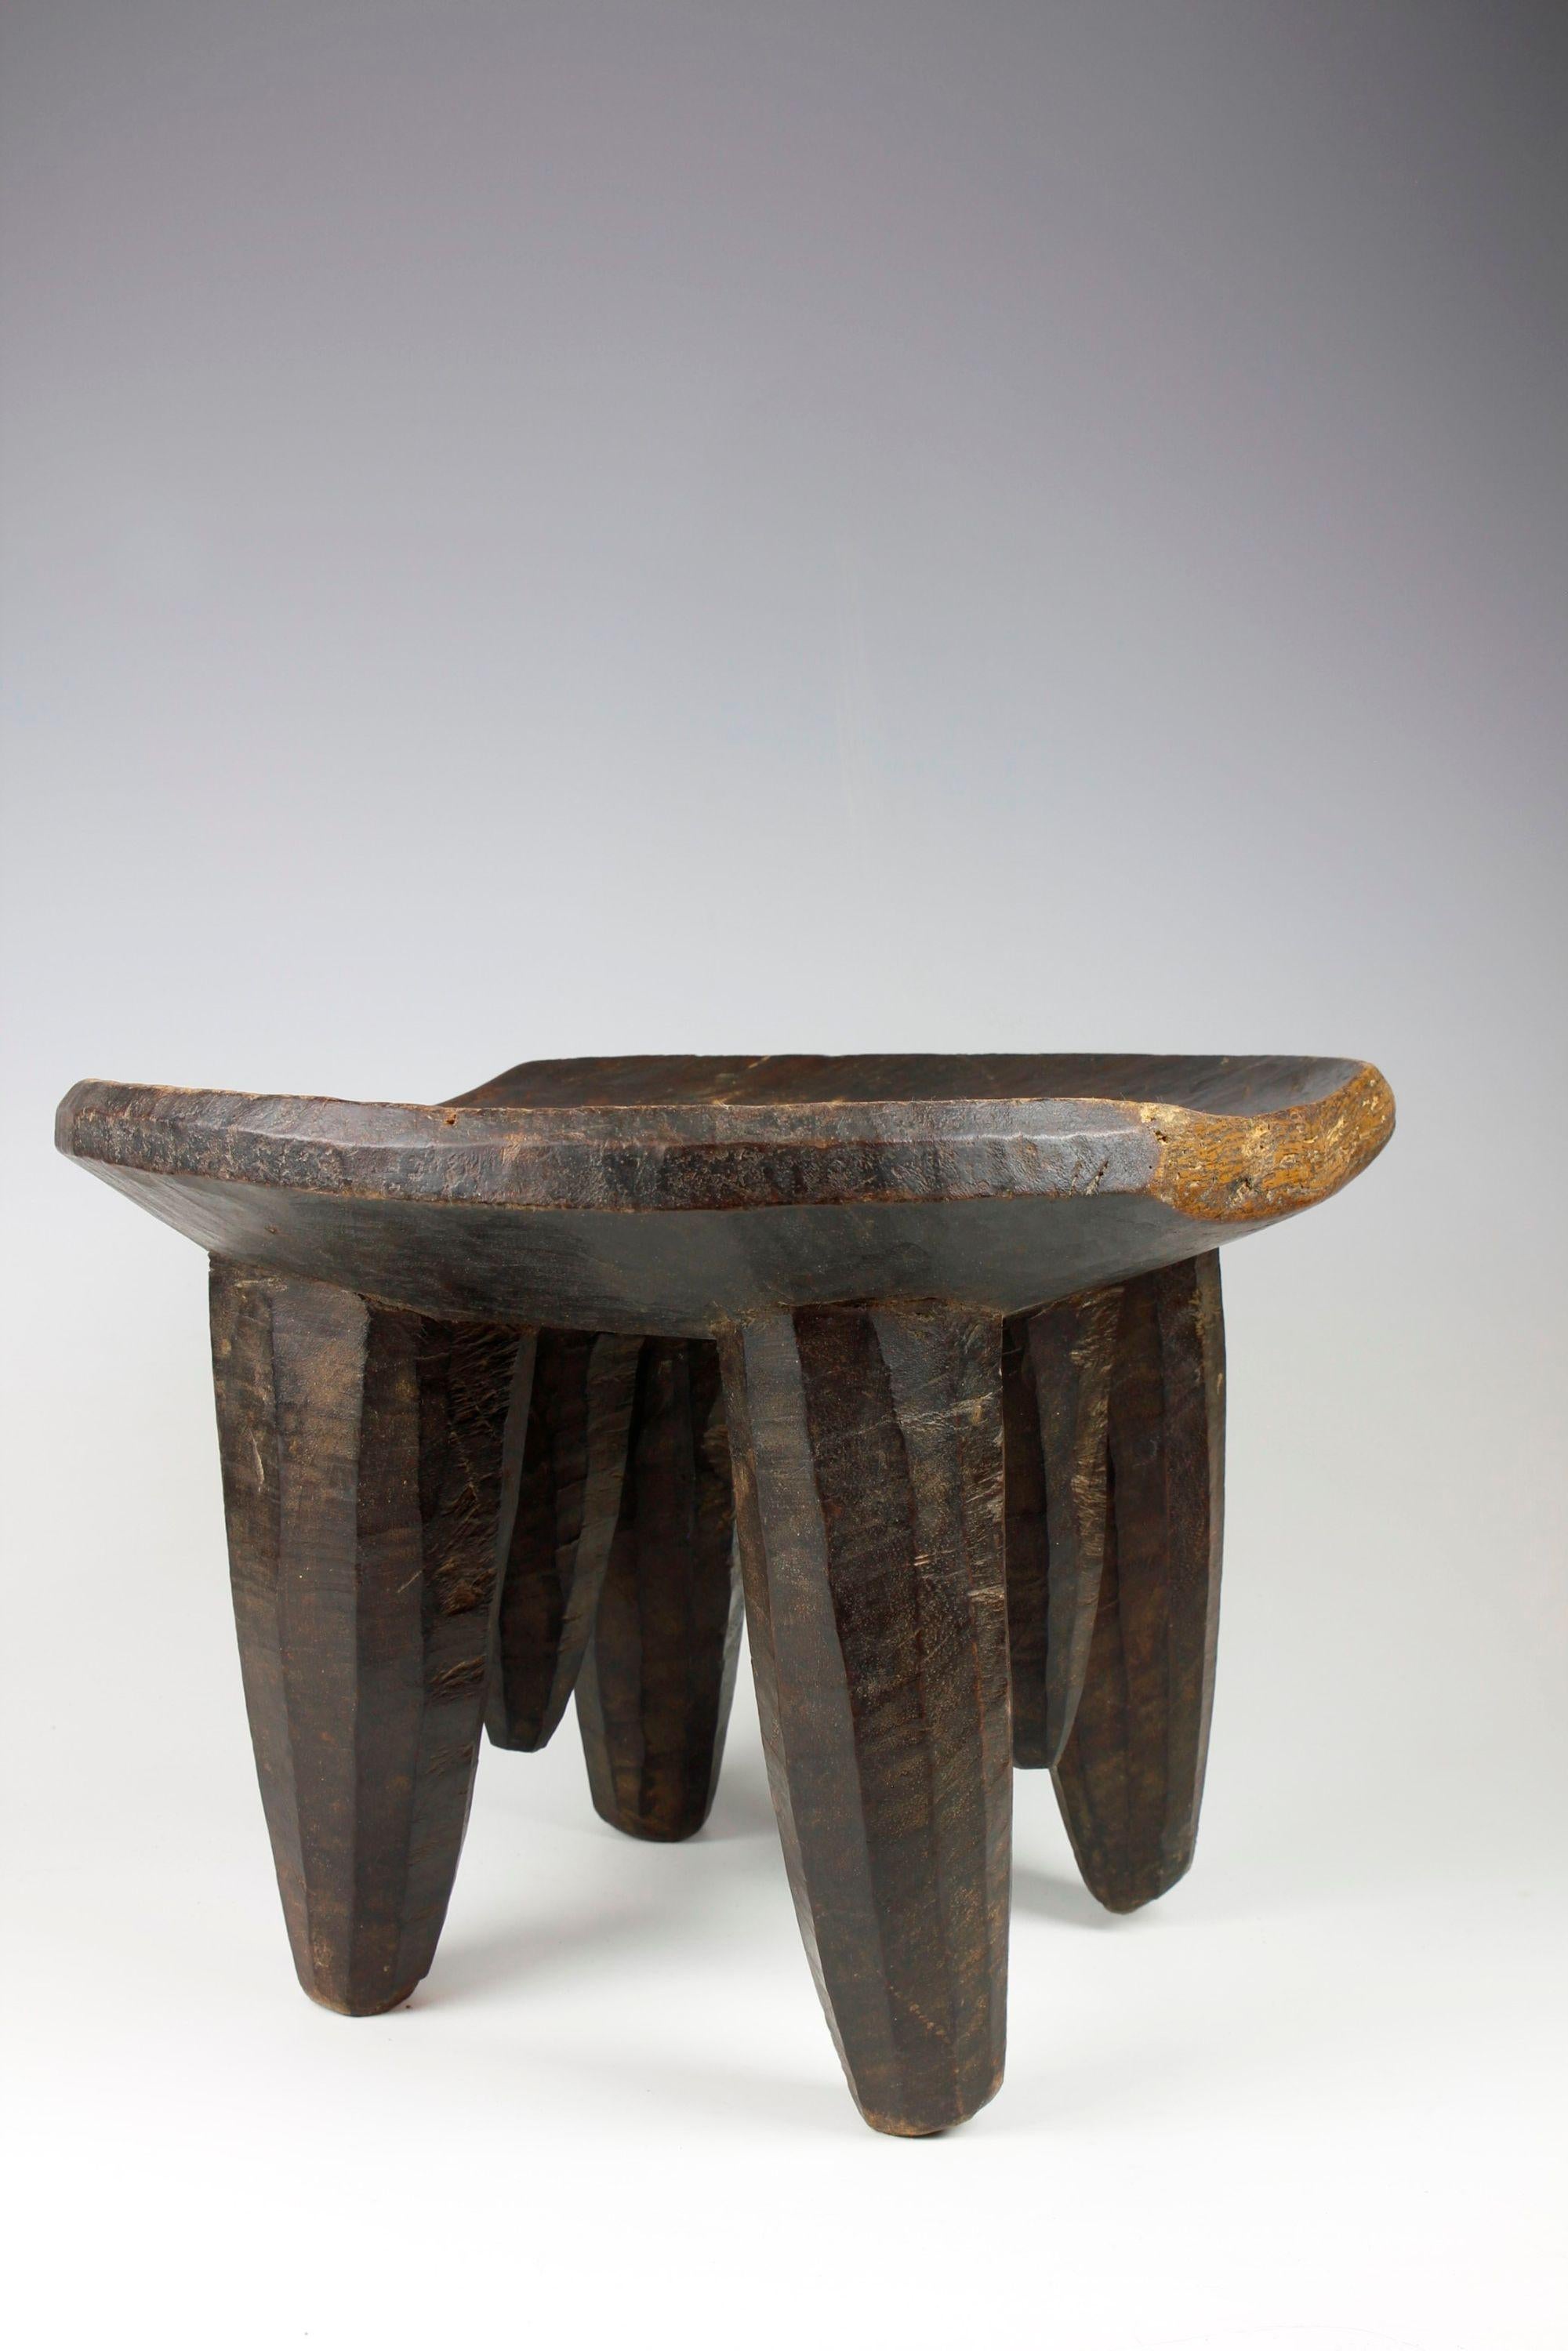 Carved Early 20th Century Ethiopian Stool with Phallic Form For Sale